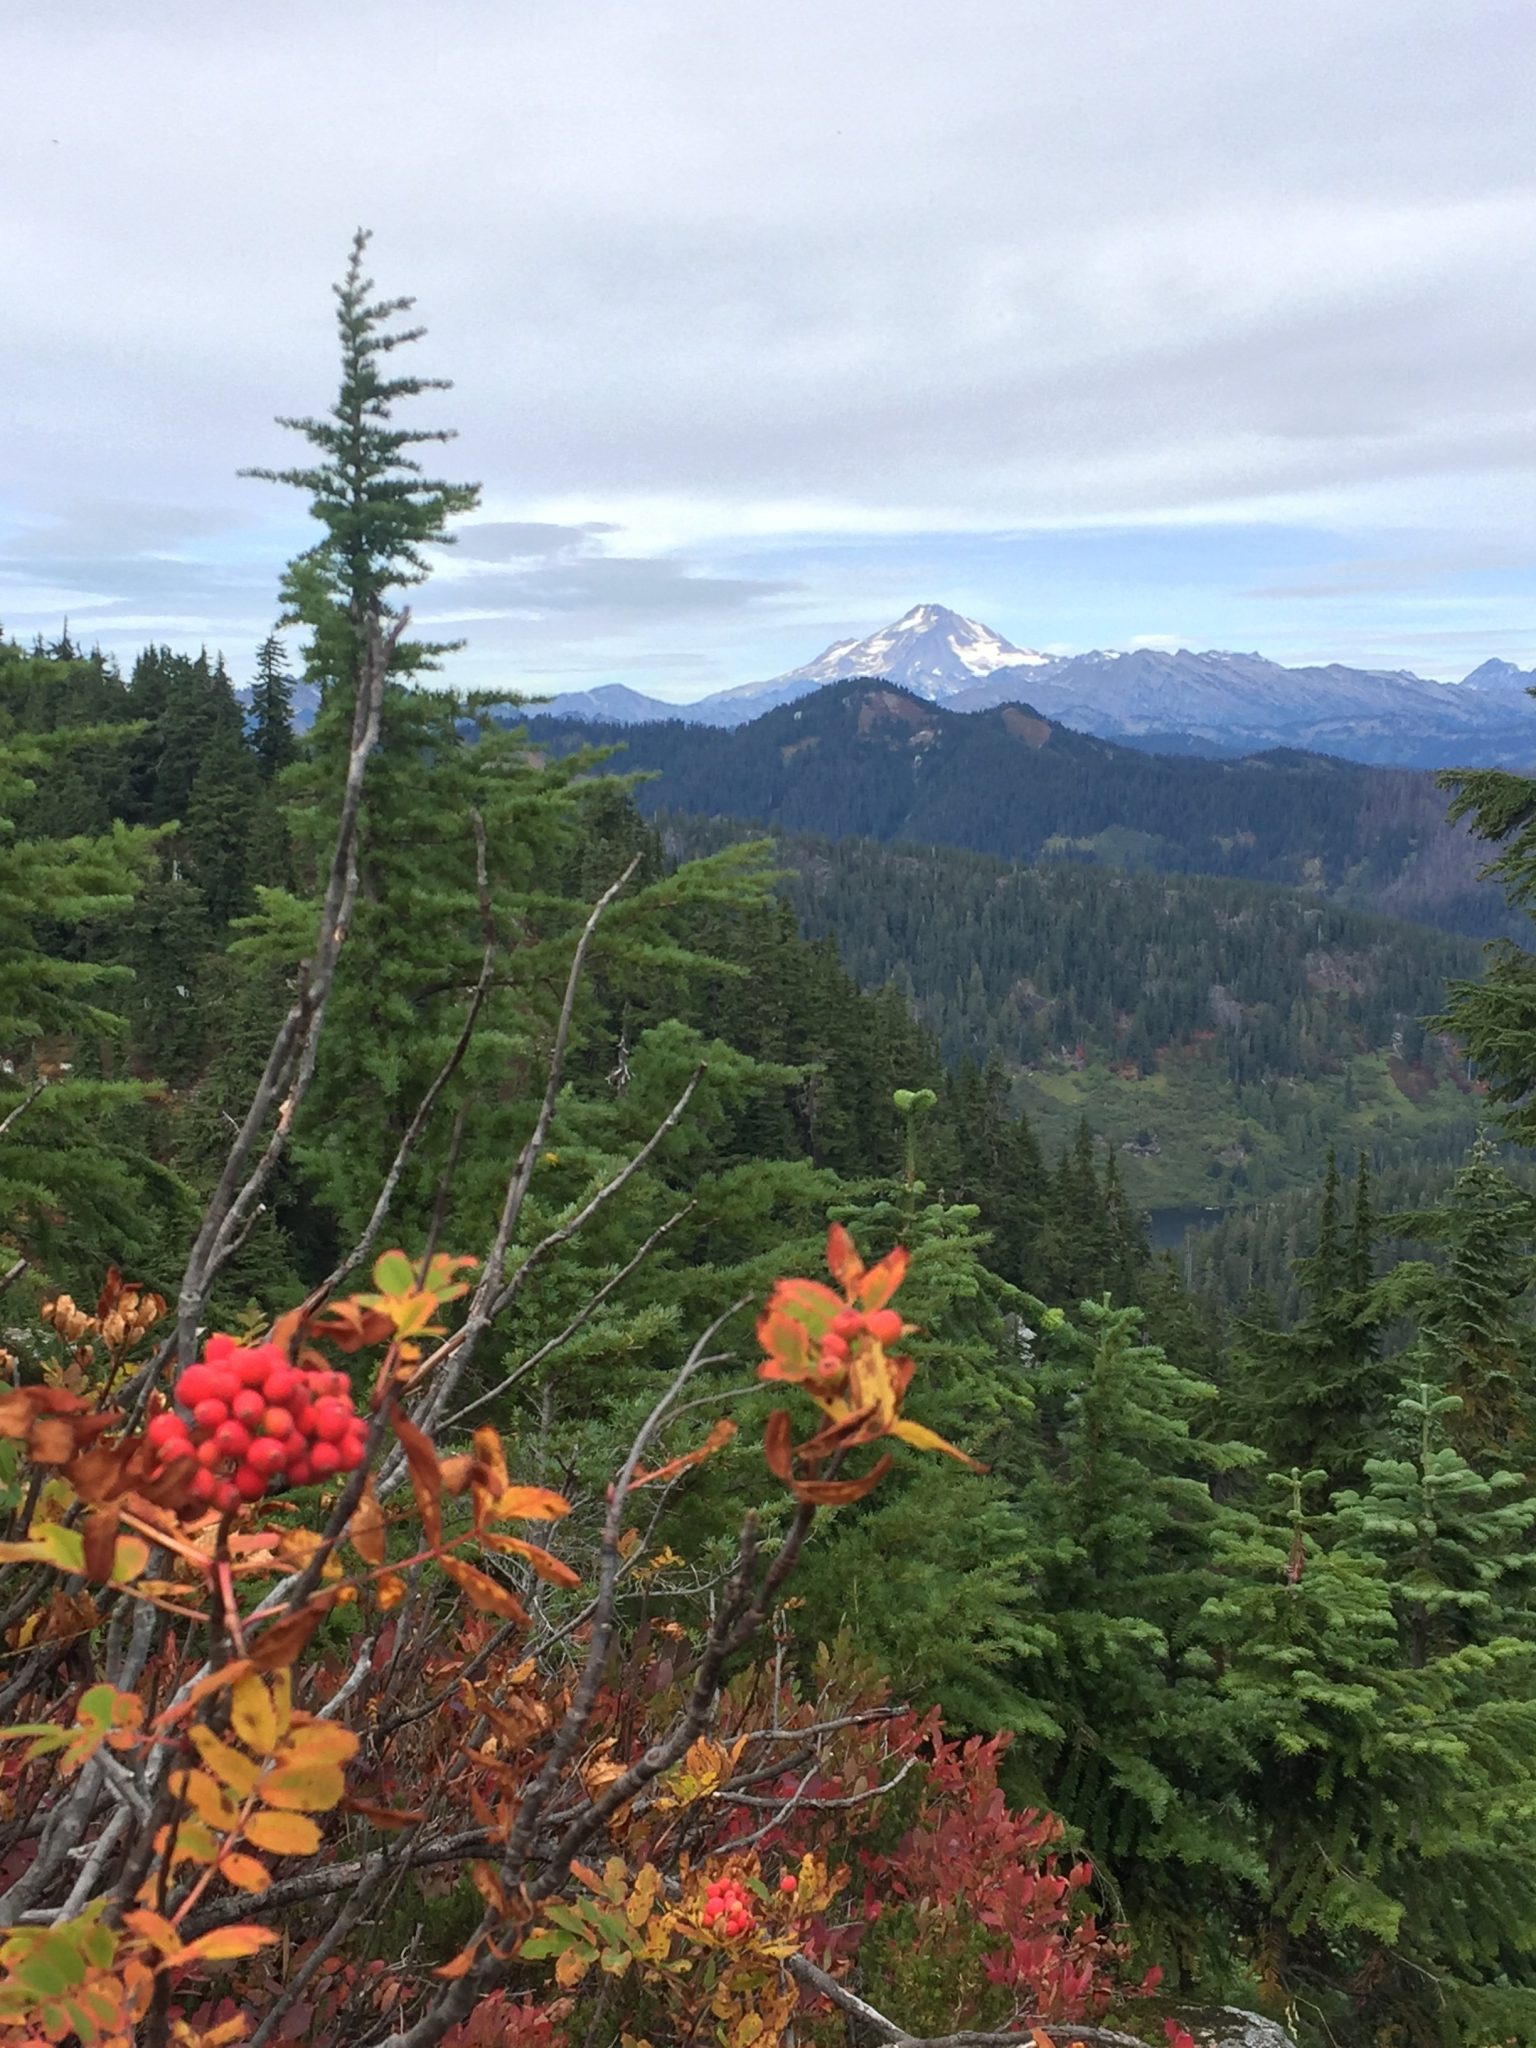 Bright red berries with a view of Glacier Peak